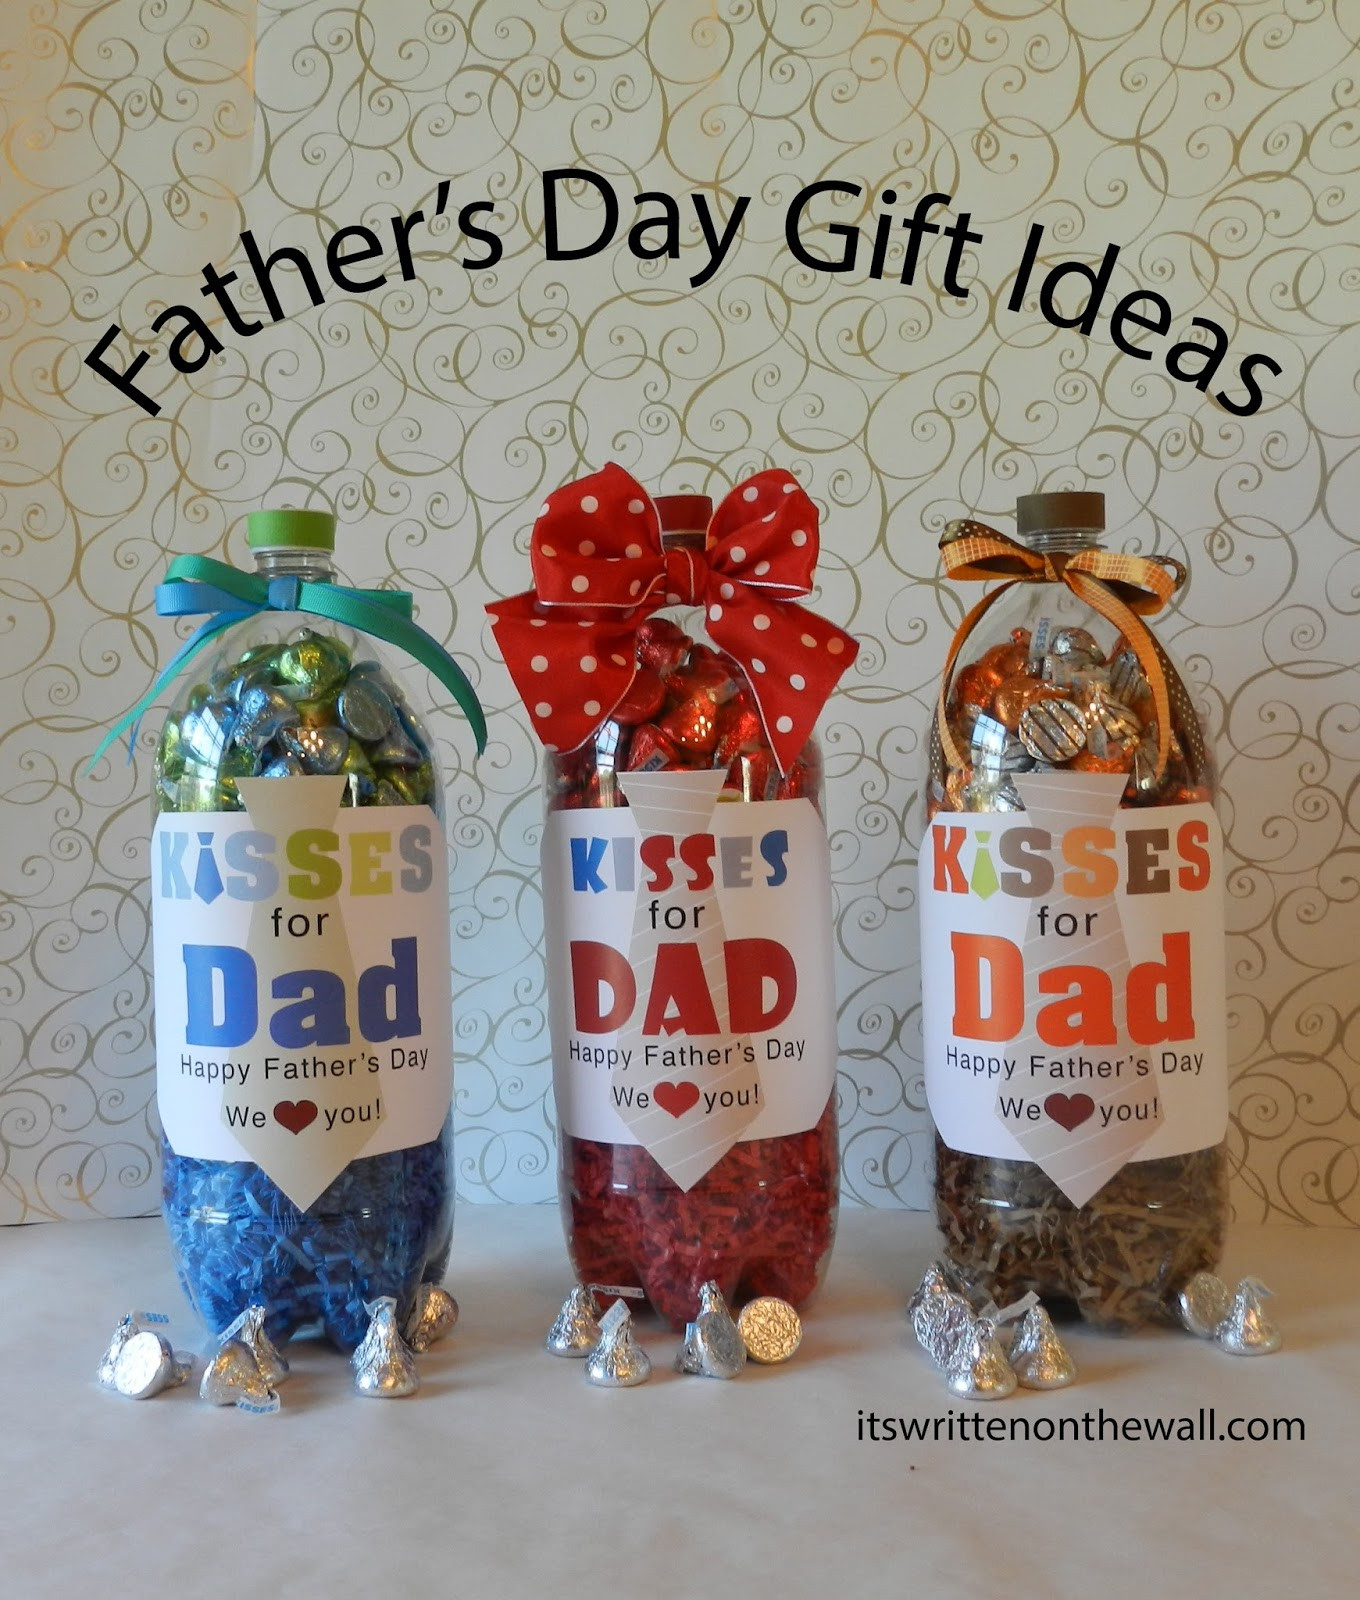 Fathers Day Ideas From Kids
 It s Written on the Wall Fathers Day Gift Ideas For the